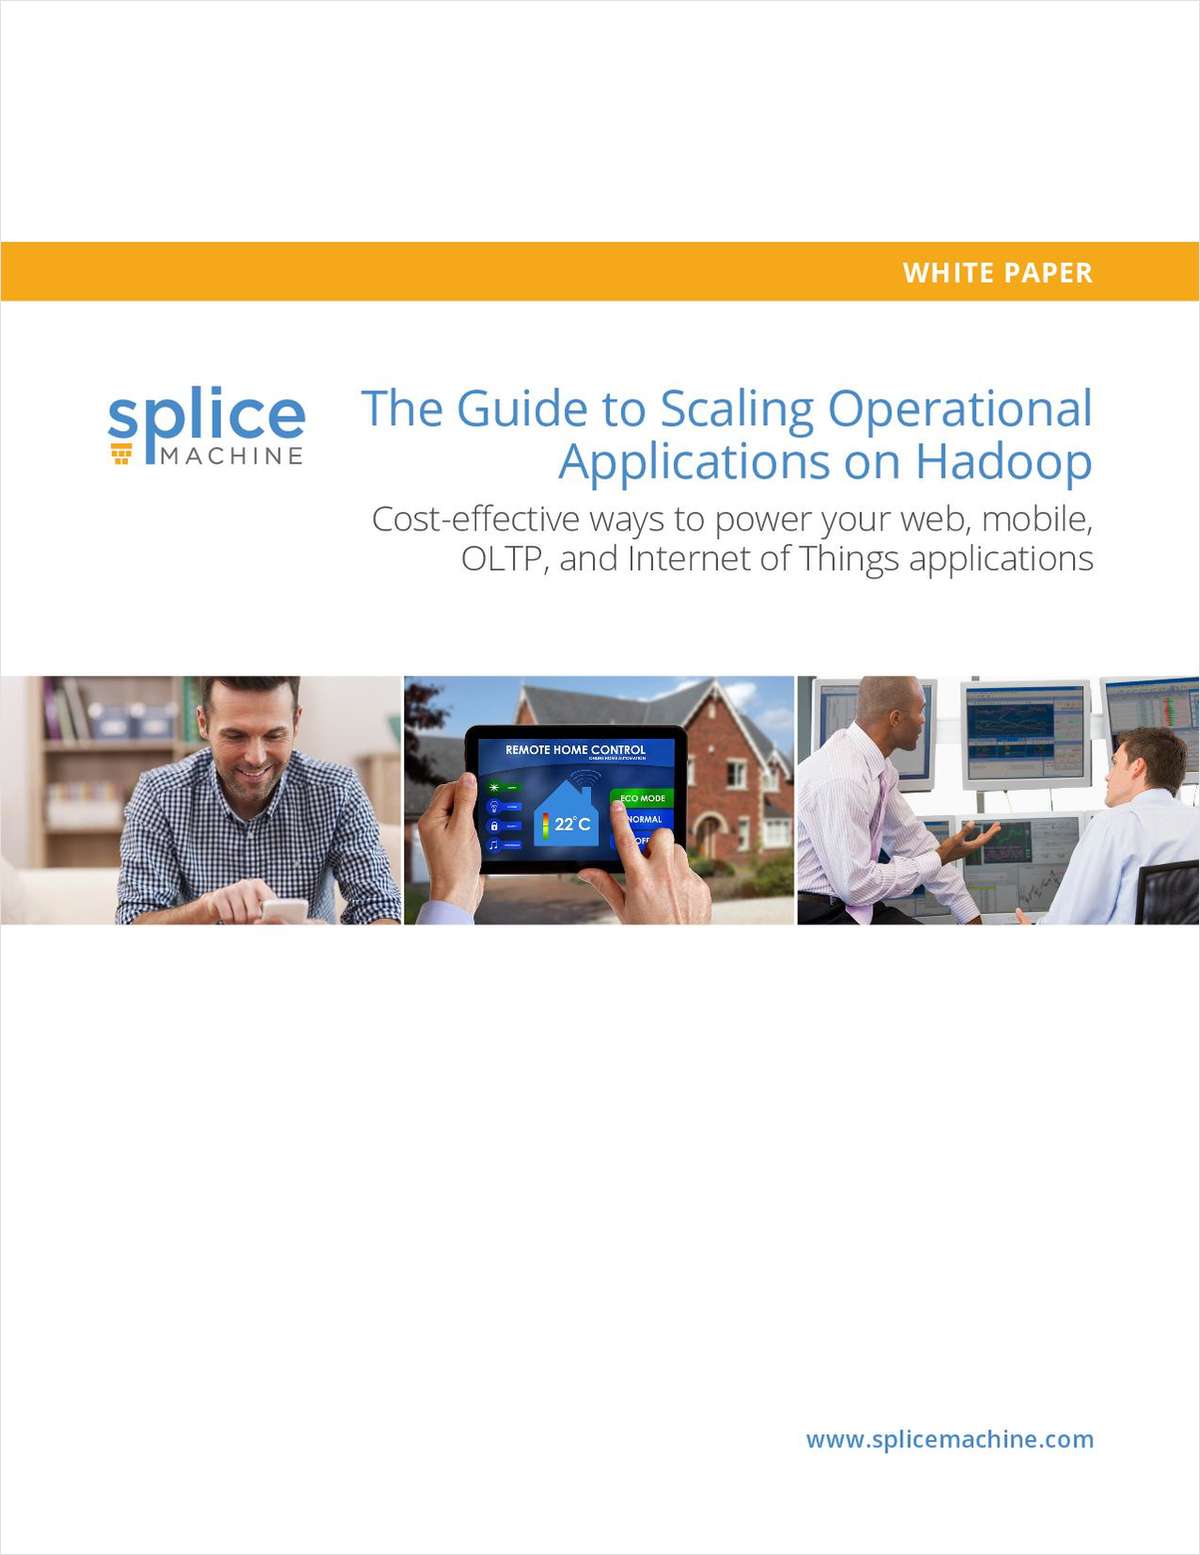 The Guide to Scaling Operational Applications on Hadoop